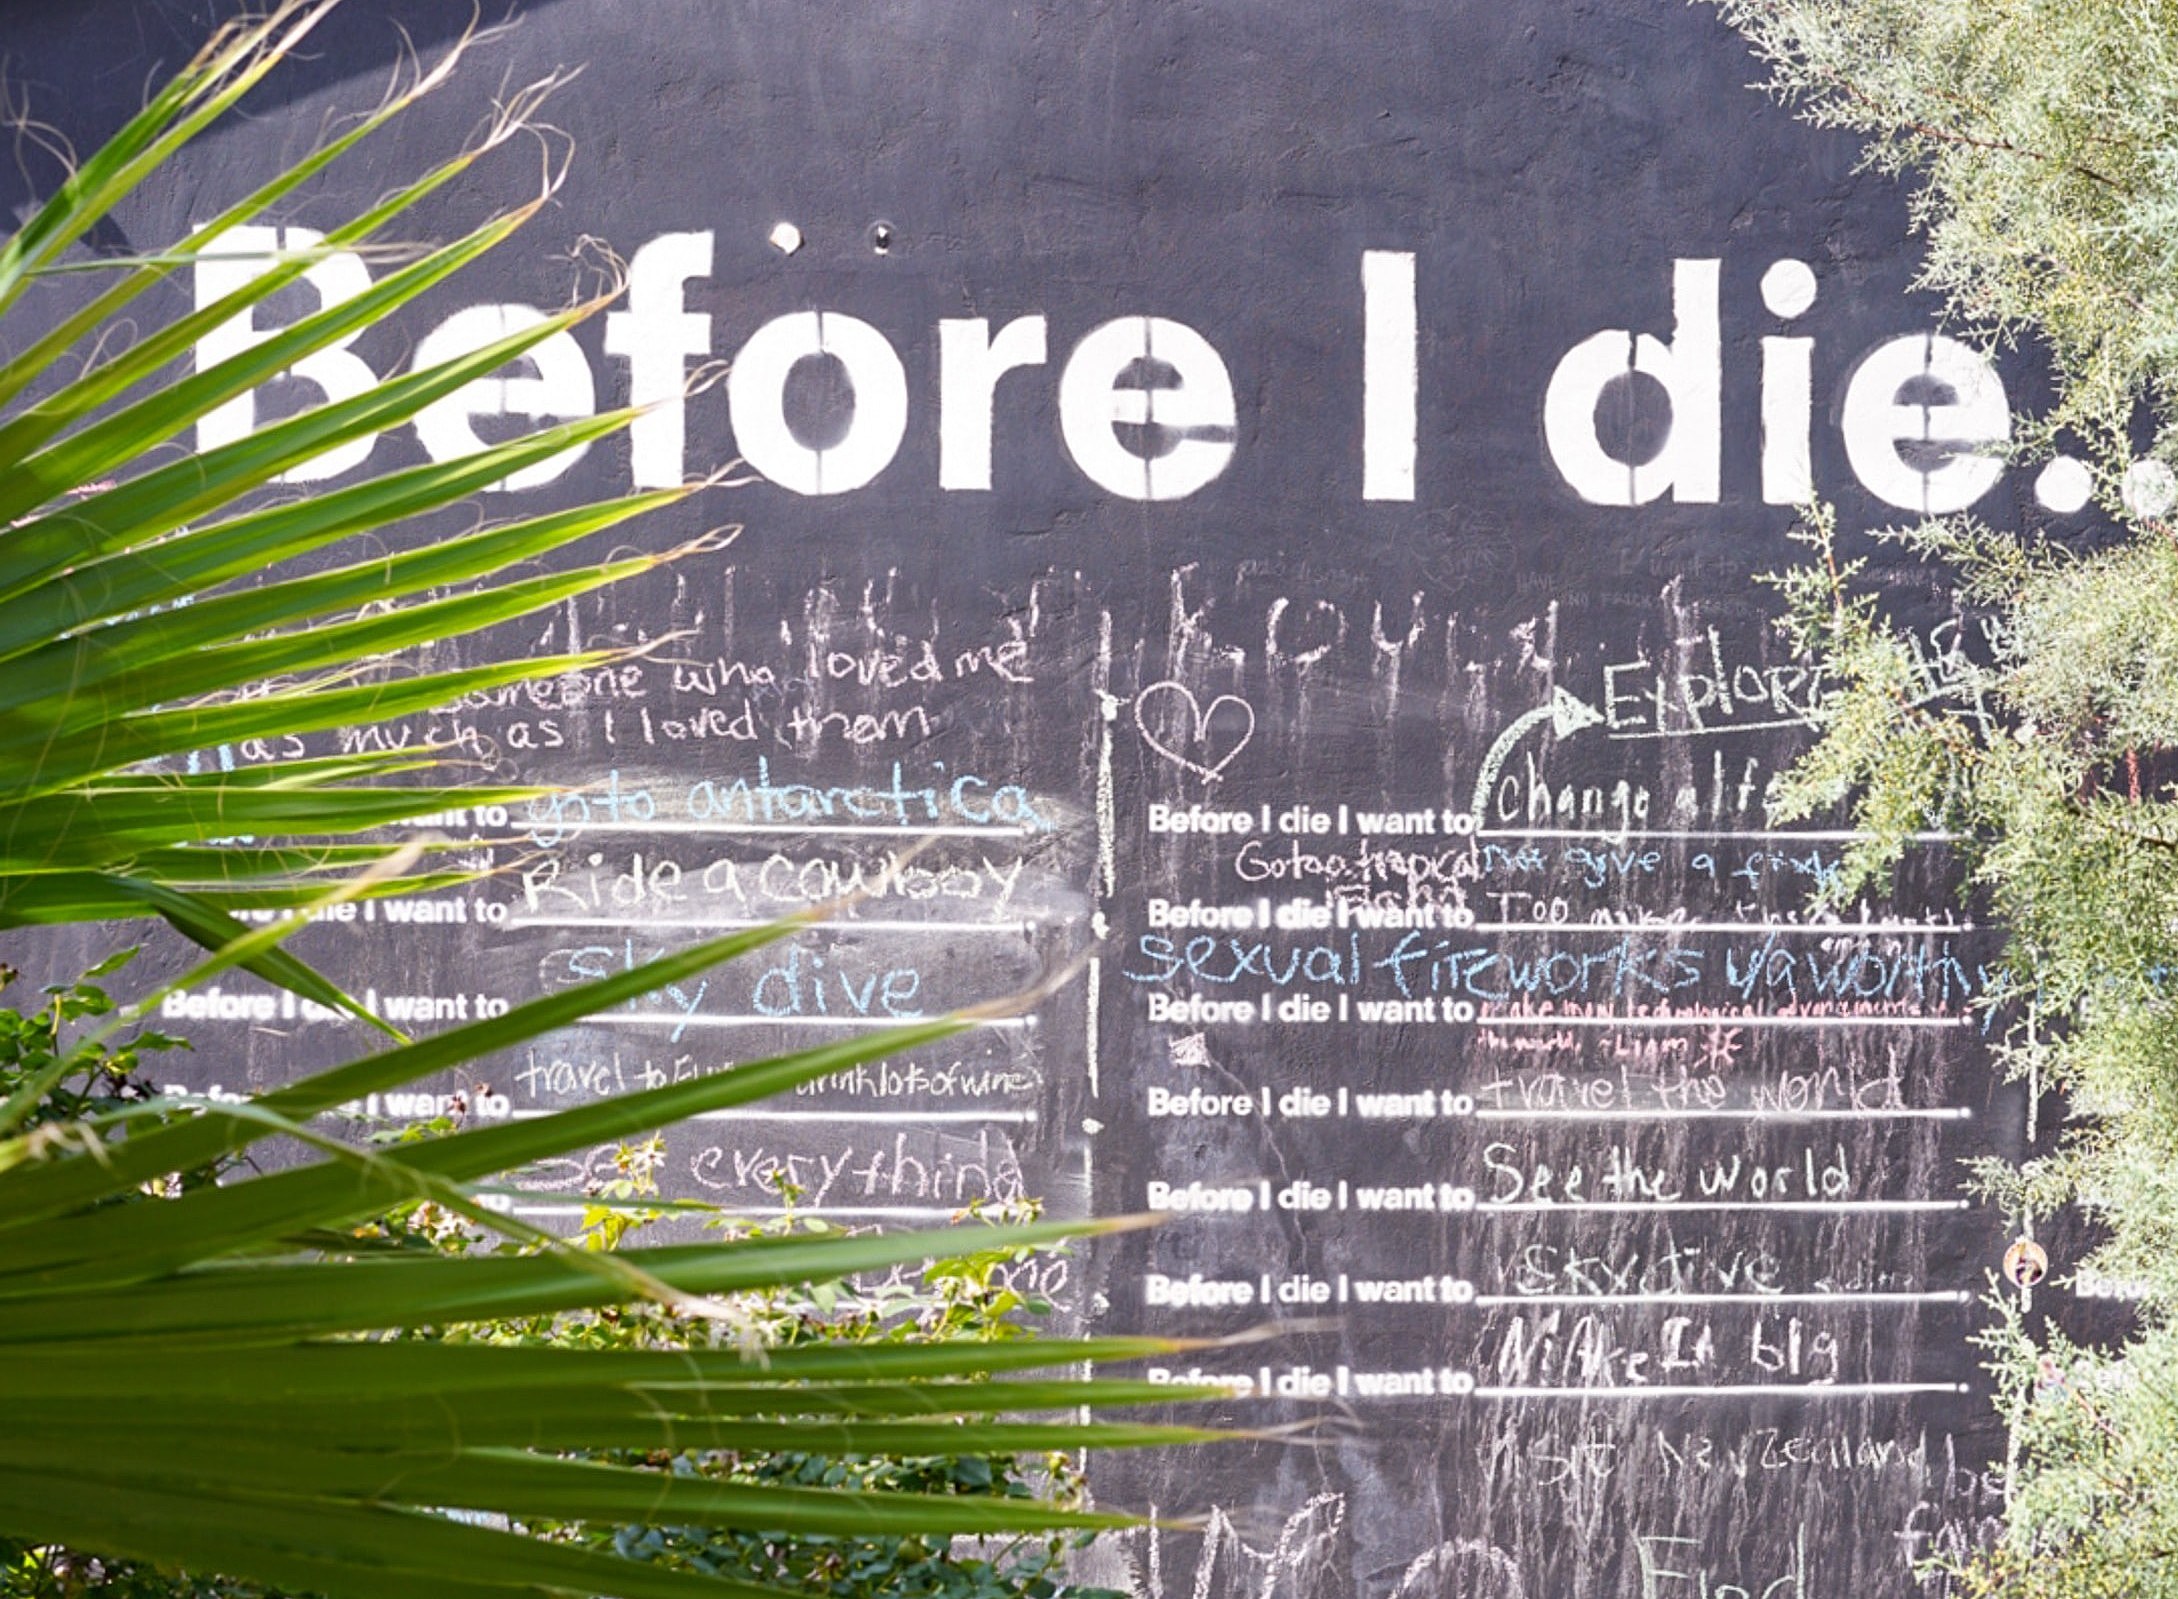 How Would You Fill In The Blank "Before I Die I Want To"